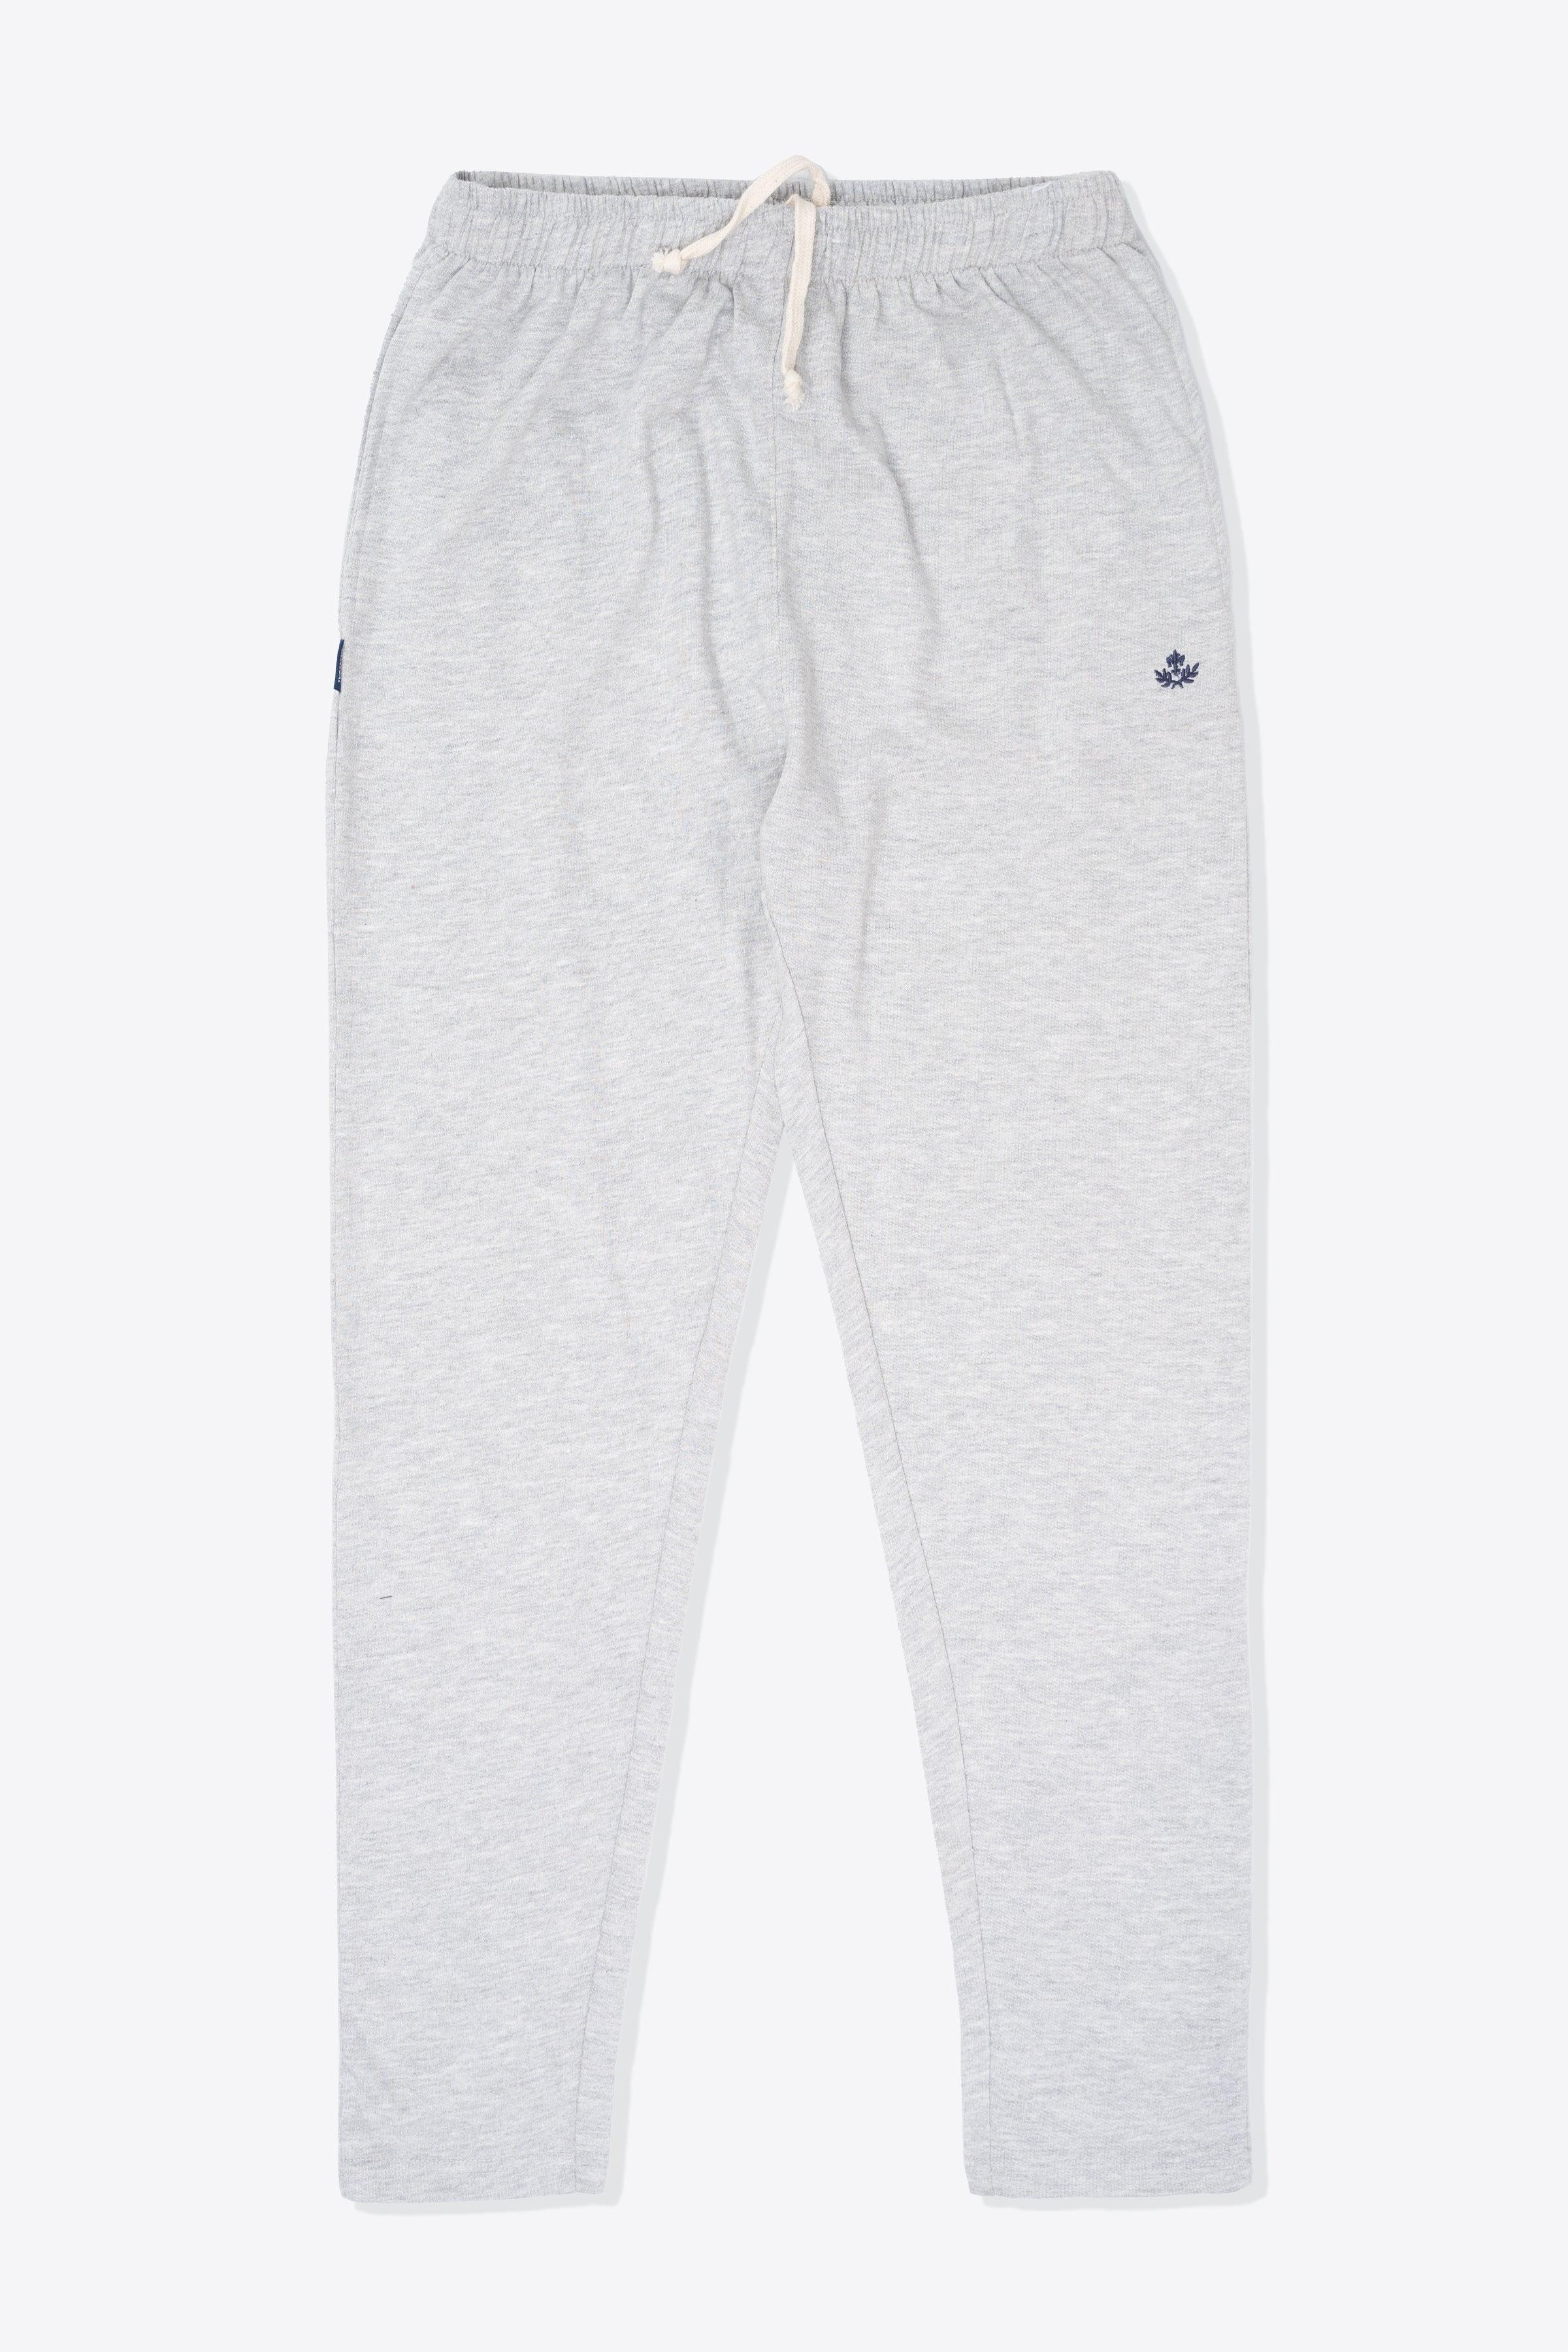 SLEEPWEAR TROUSER GREY at Charcoal Clothing